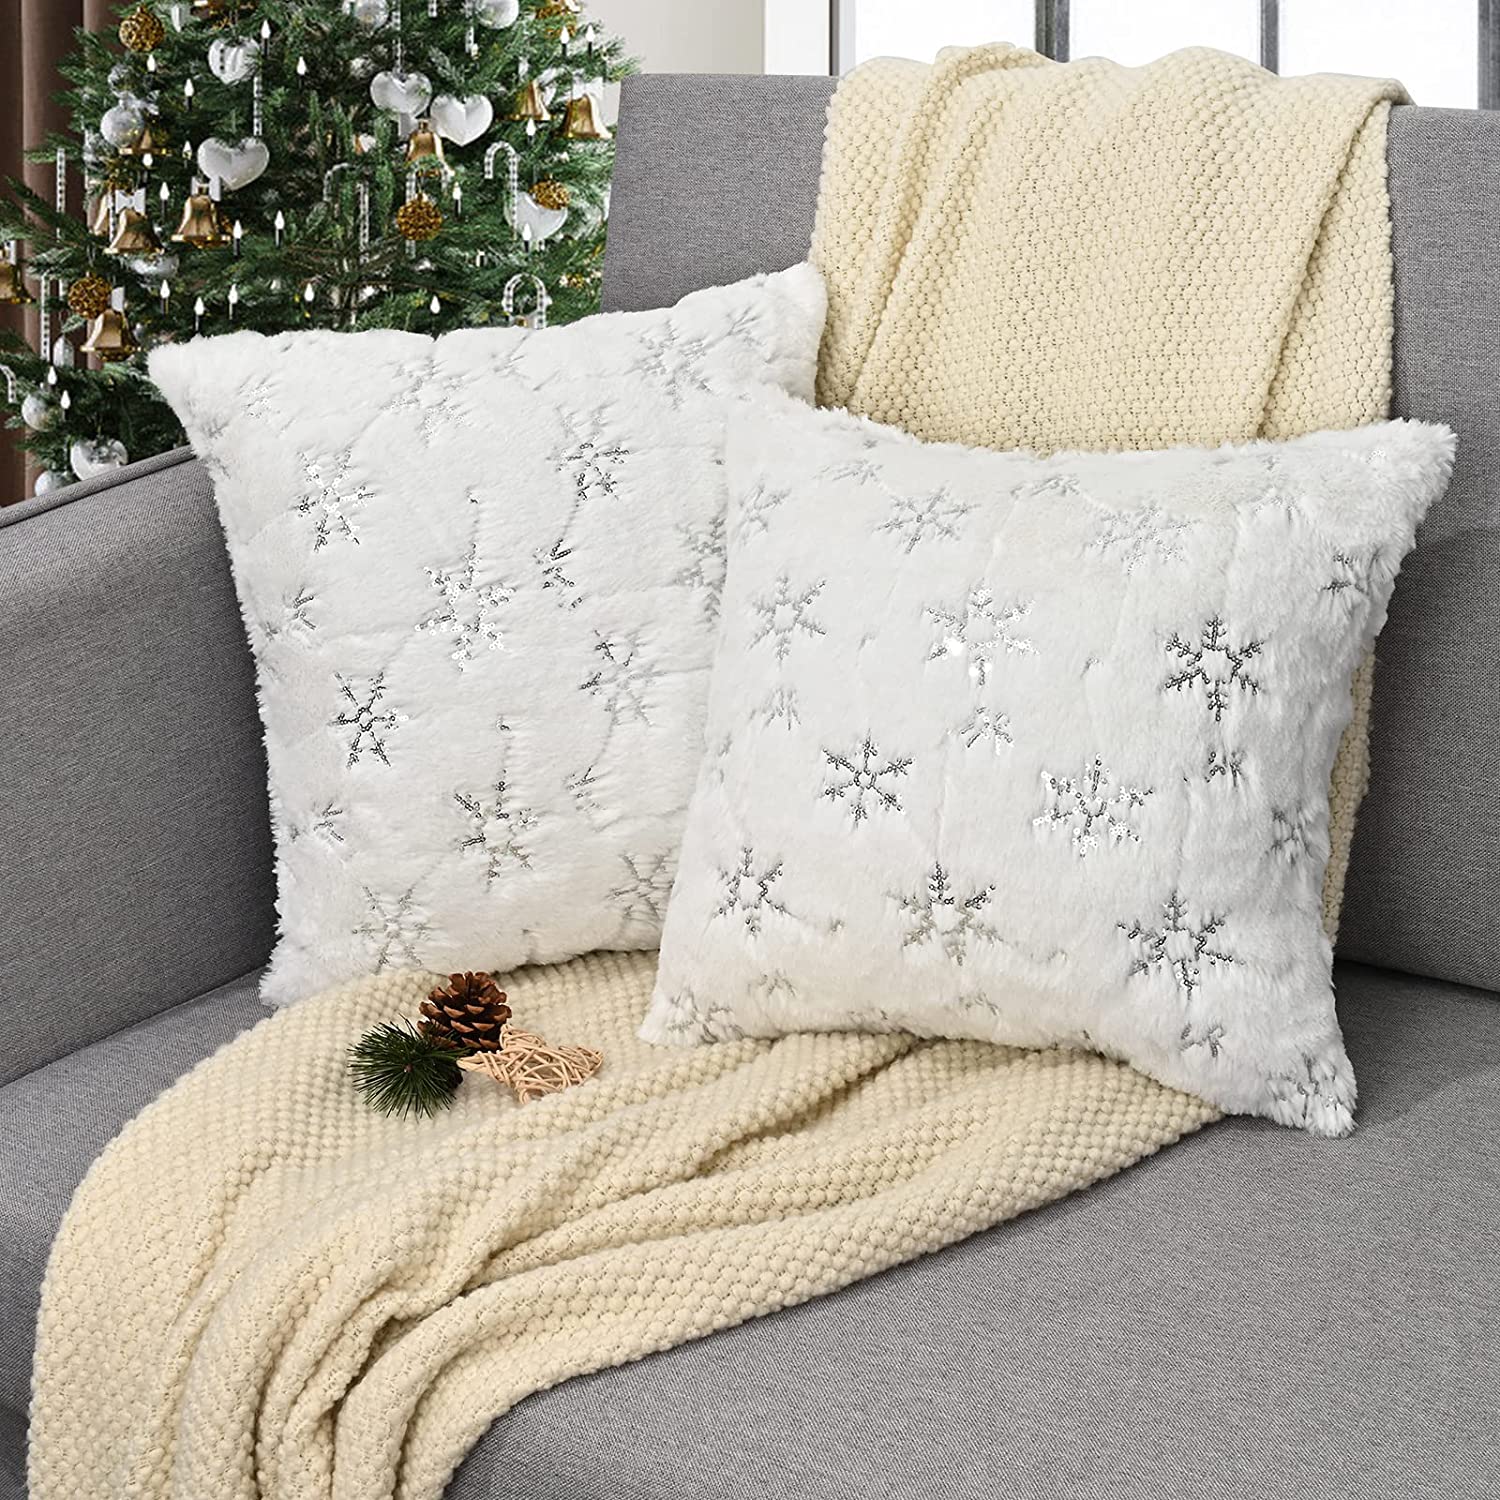 Set of 2 Faux Fur Cushion Covers Silver Snowflake Sequin Pillow Cases Fluffy Christmas Decorative Cushion Cases